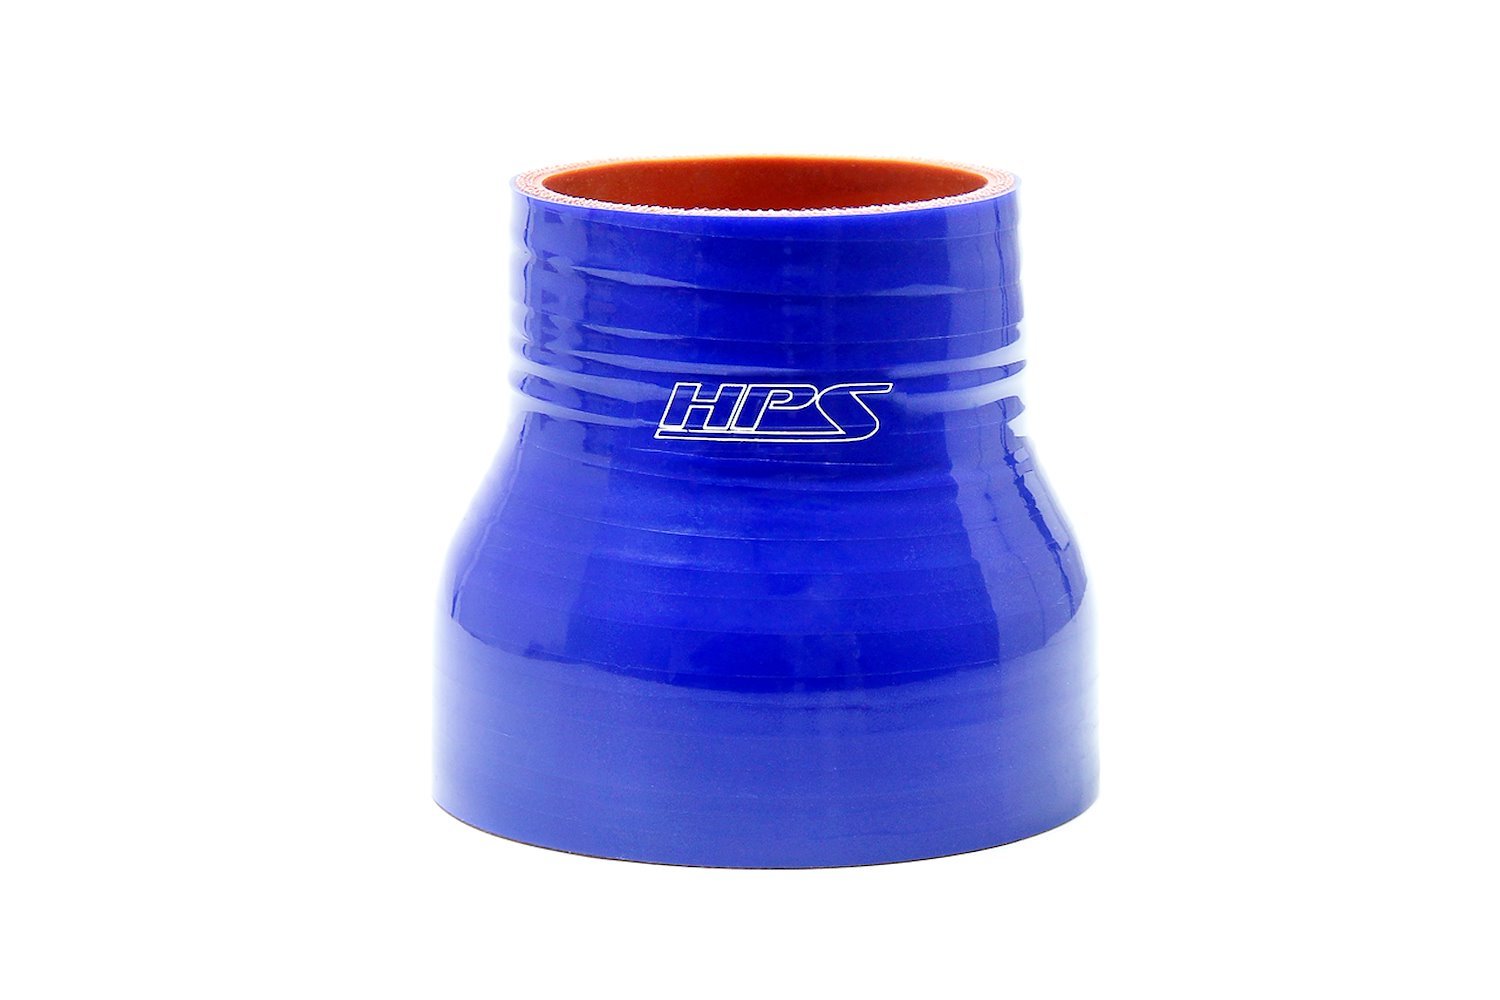 HTSR-250-300-BLUE Silicone Reducer Hose, High-Temp 4-Ply Reinforced, 2-1/2 in. - 3 in. ID, 3 in. Long, Blue